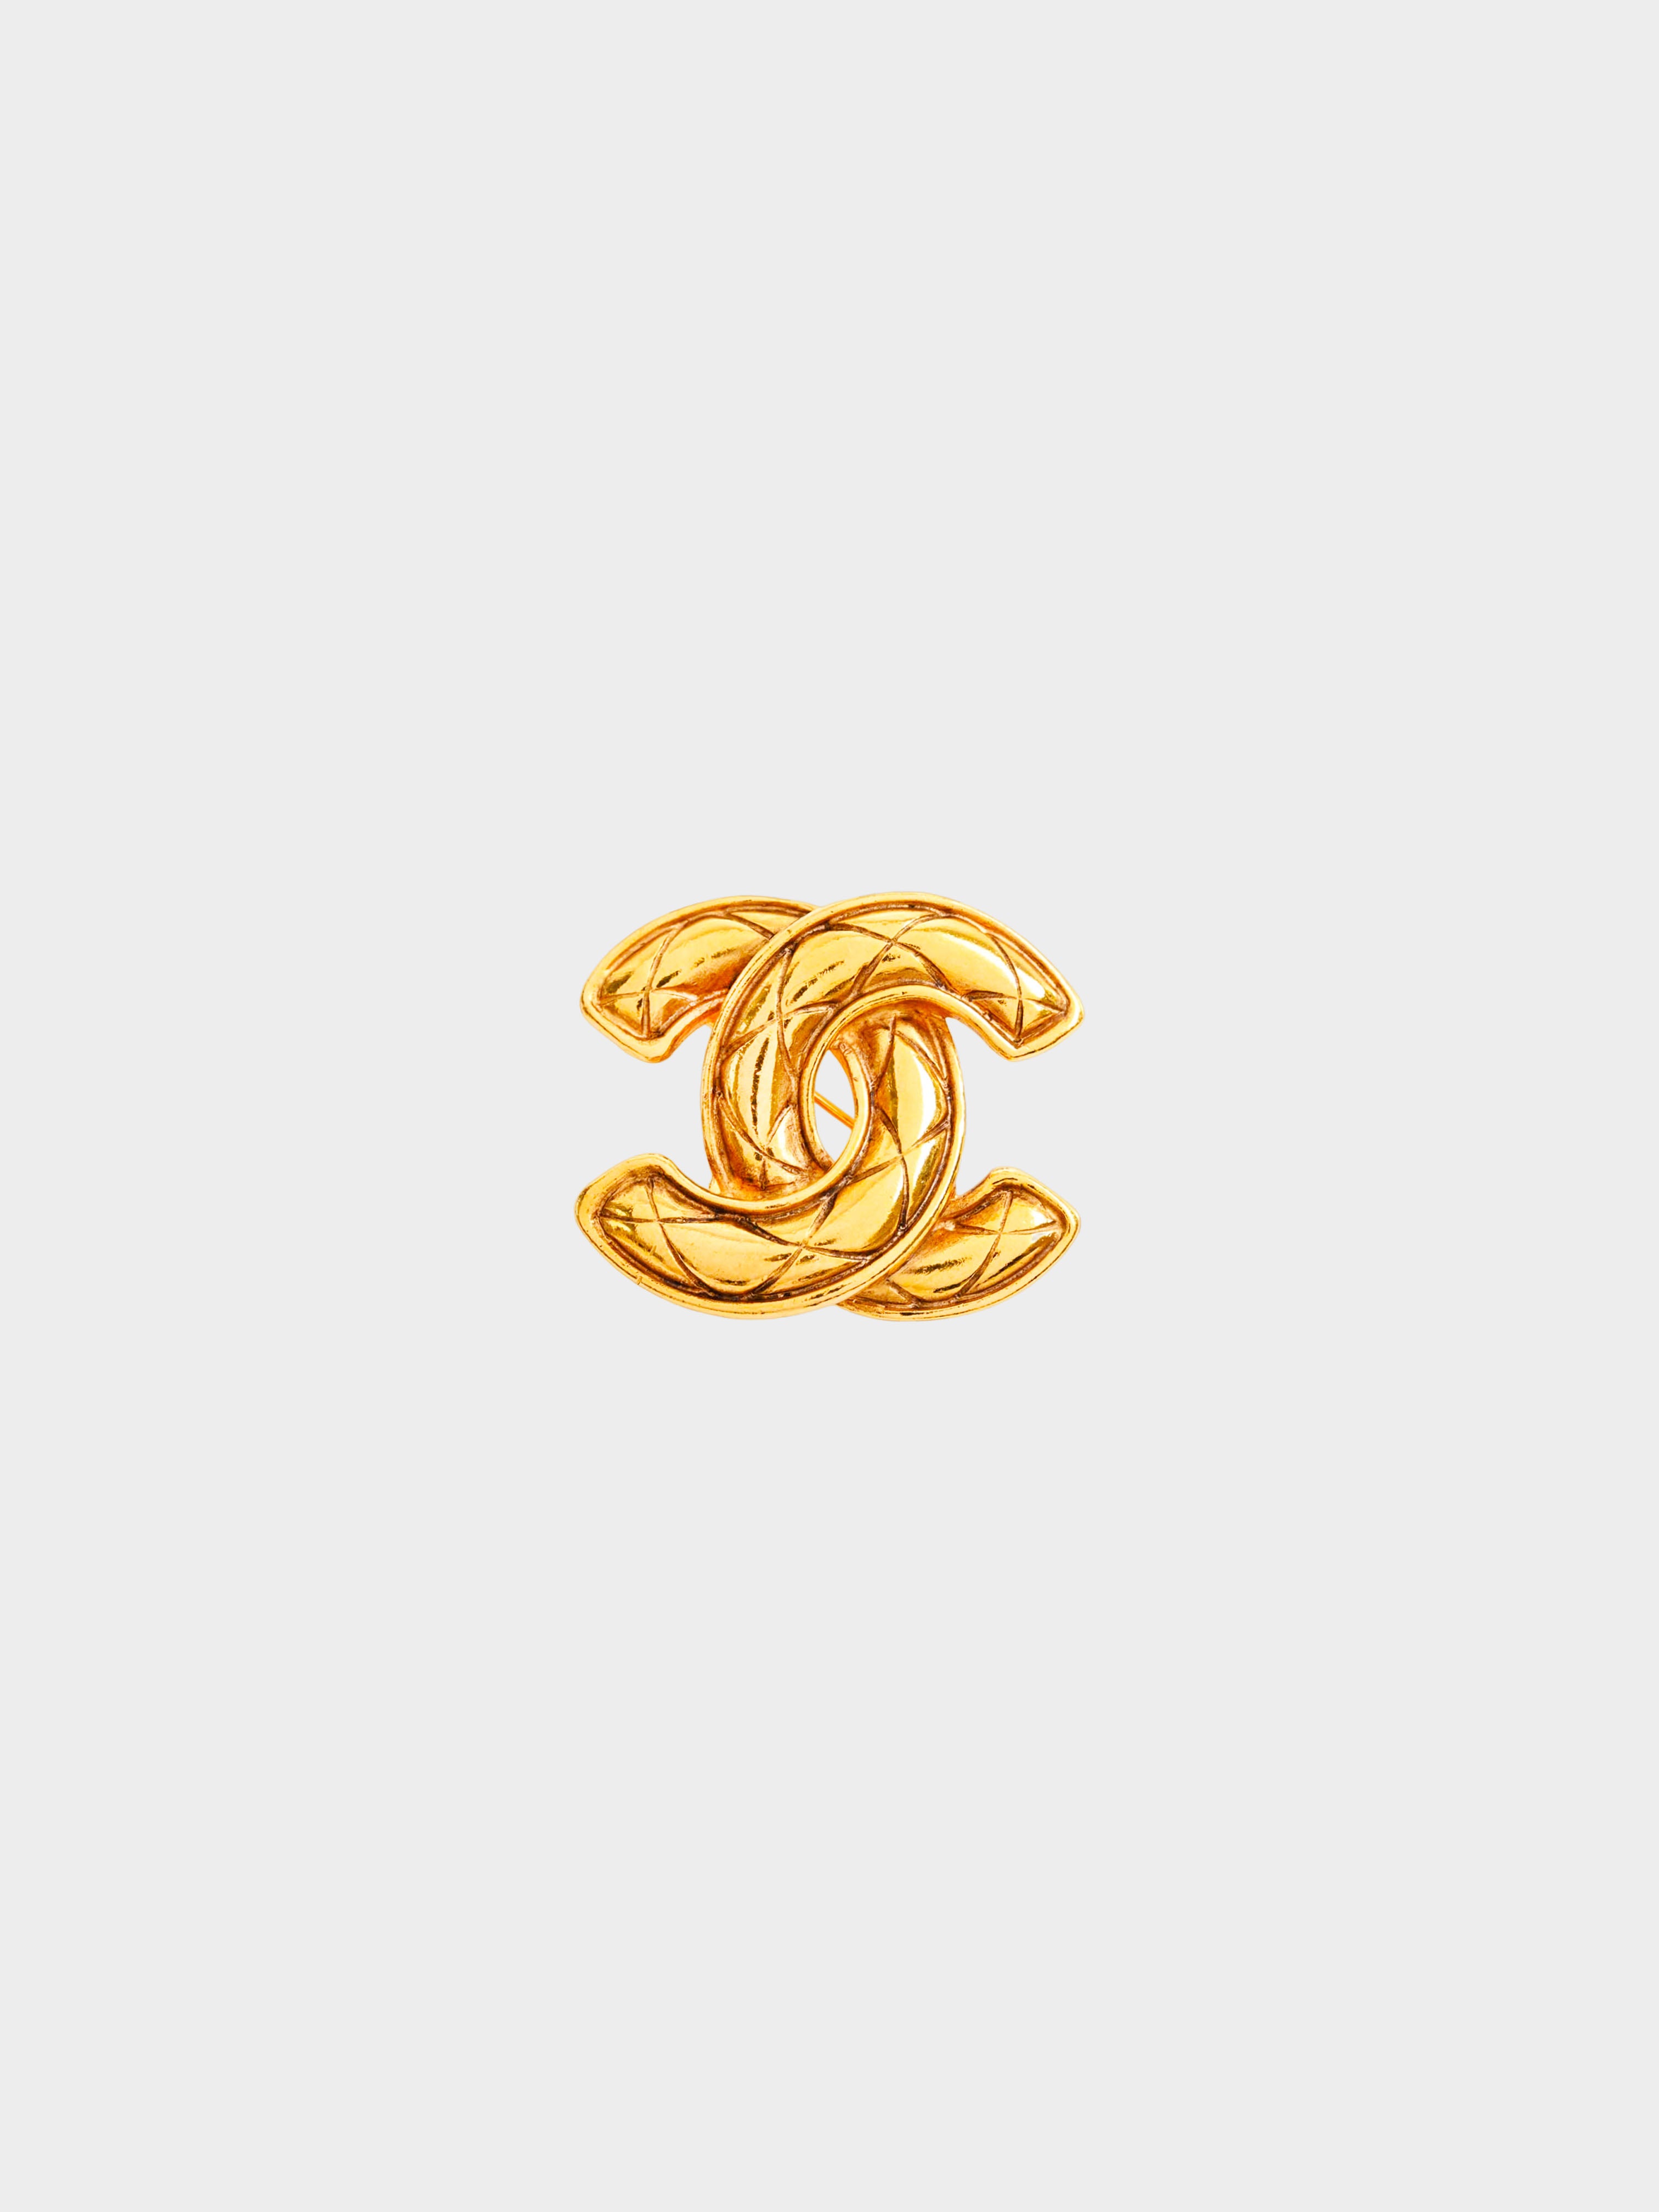 Chanel 1980s Vintage Gold Quilted Brooch